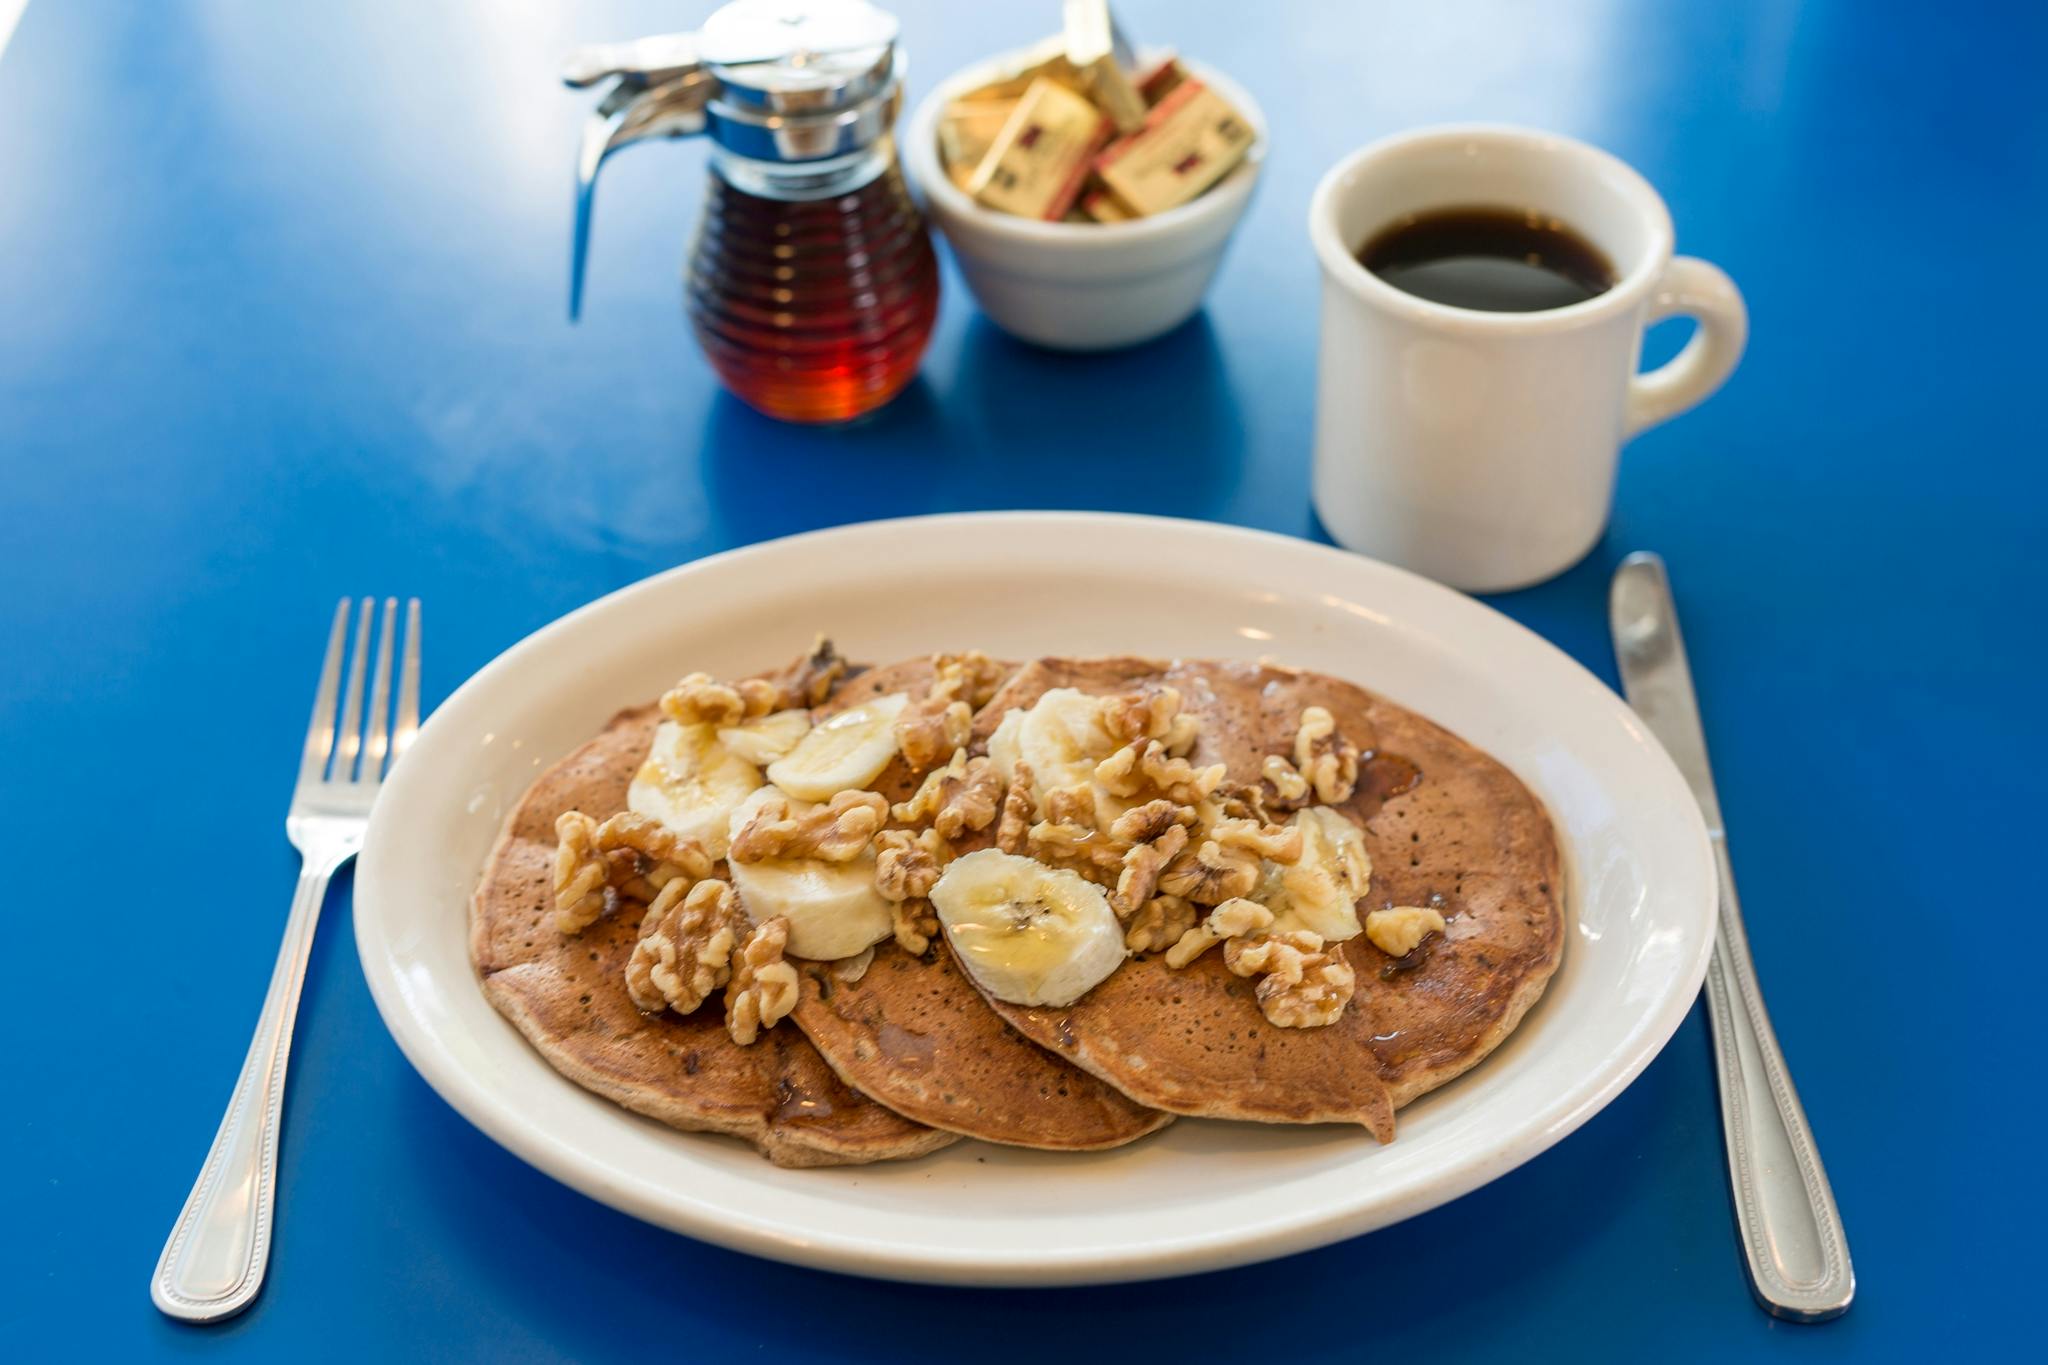 Vegan Banana Walnut Pancakes from Monty's Blue Plate Diner in Madison, WI